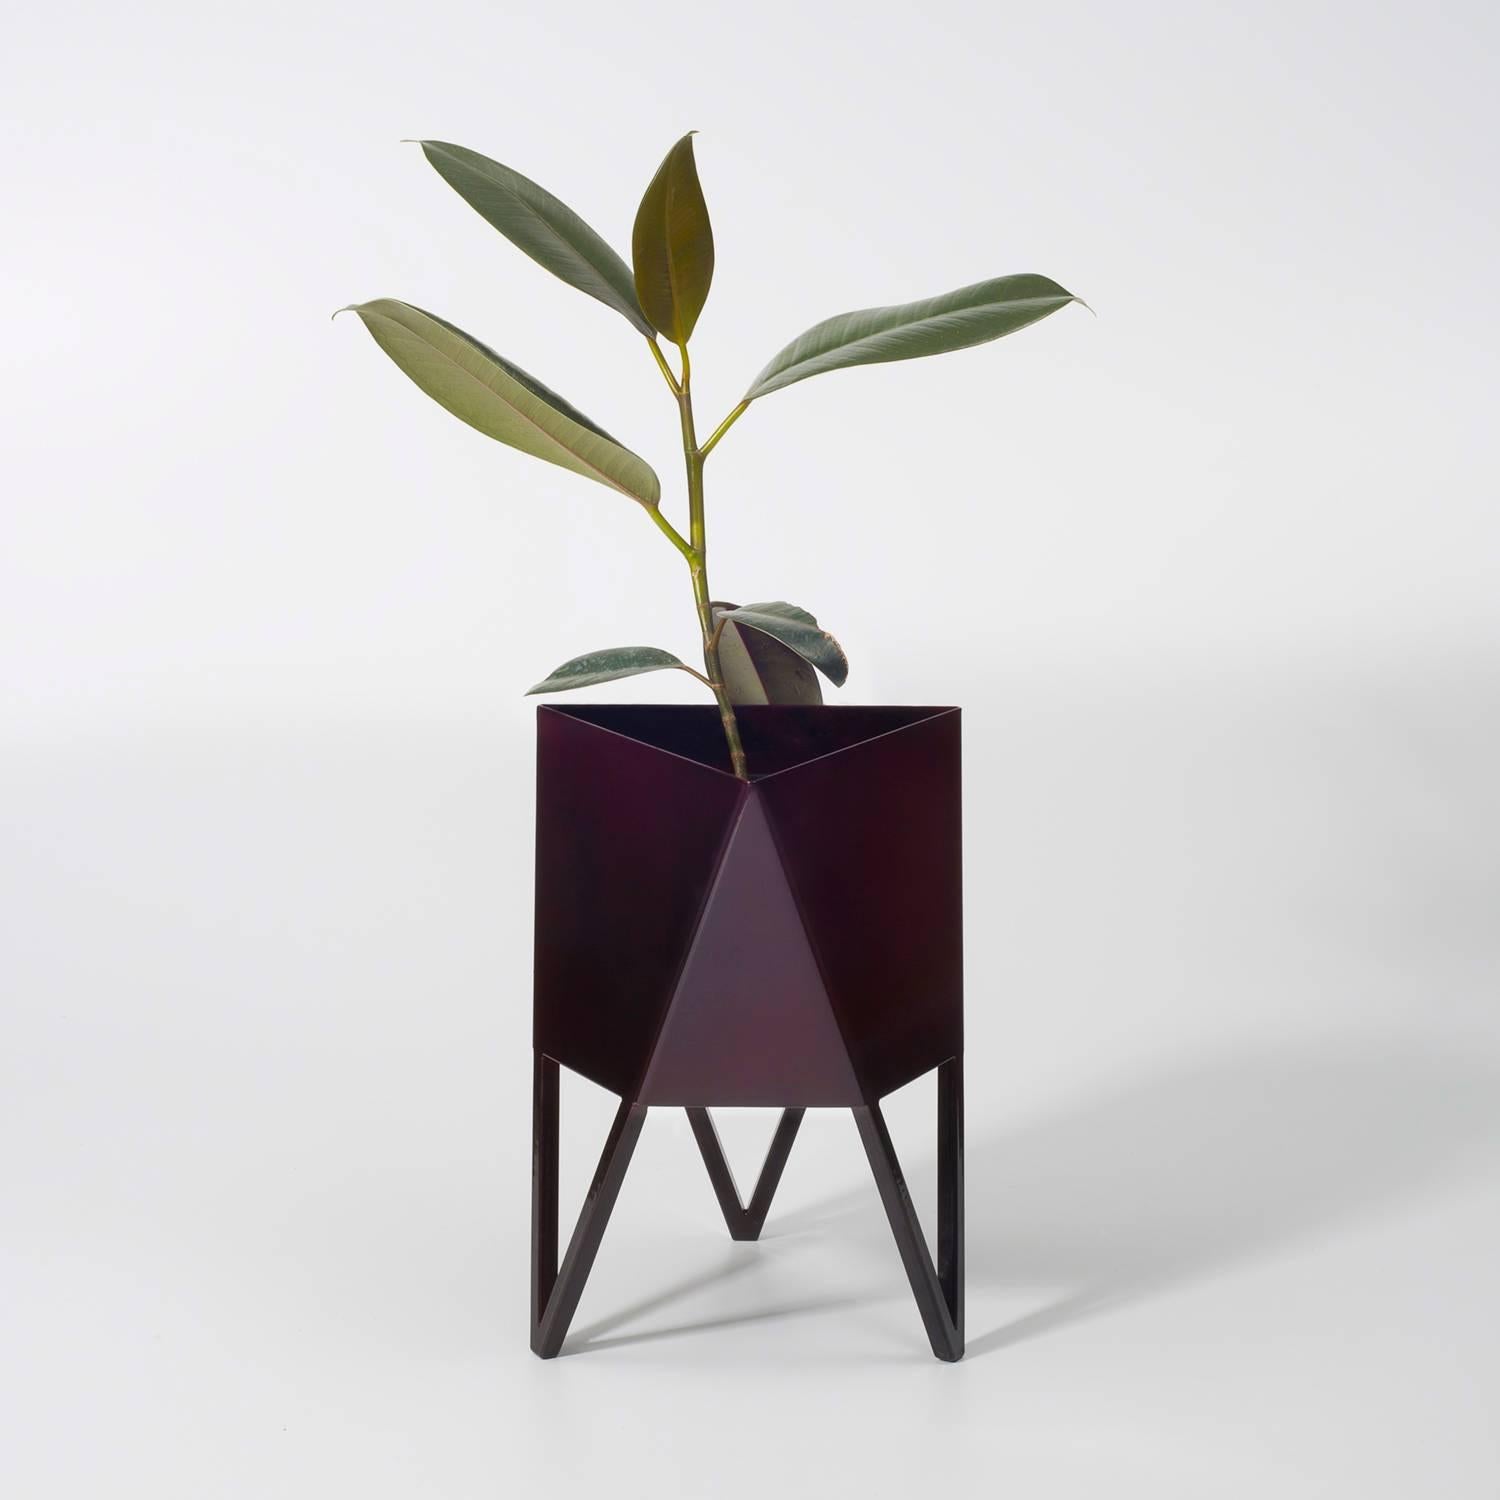 Deca Planter, Pastel Green Steel, Small, by Force/Collide 1